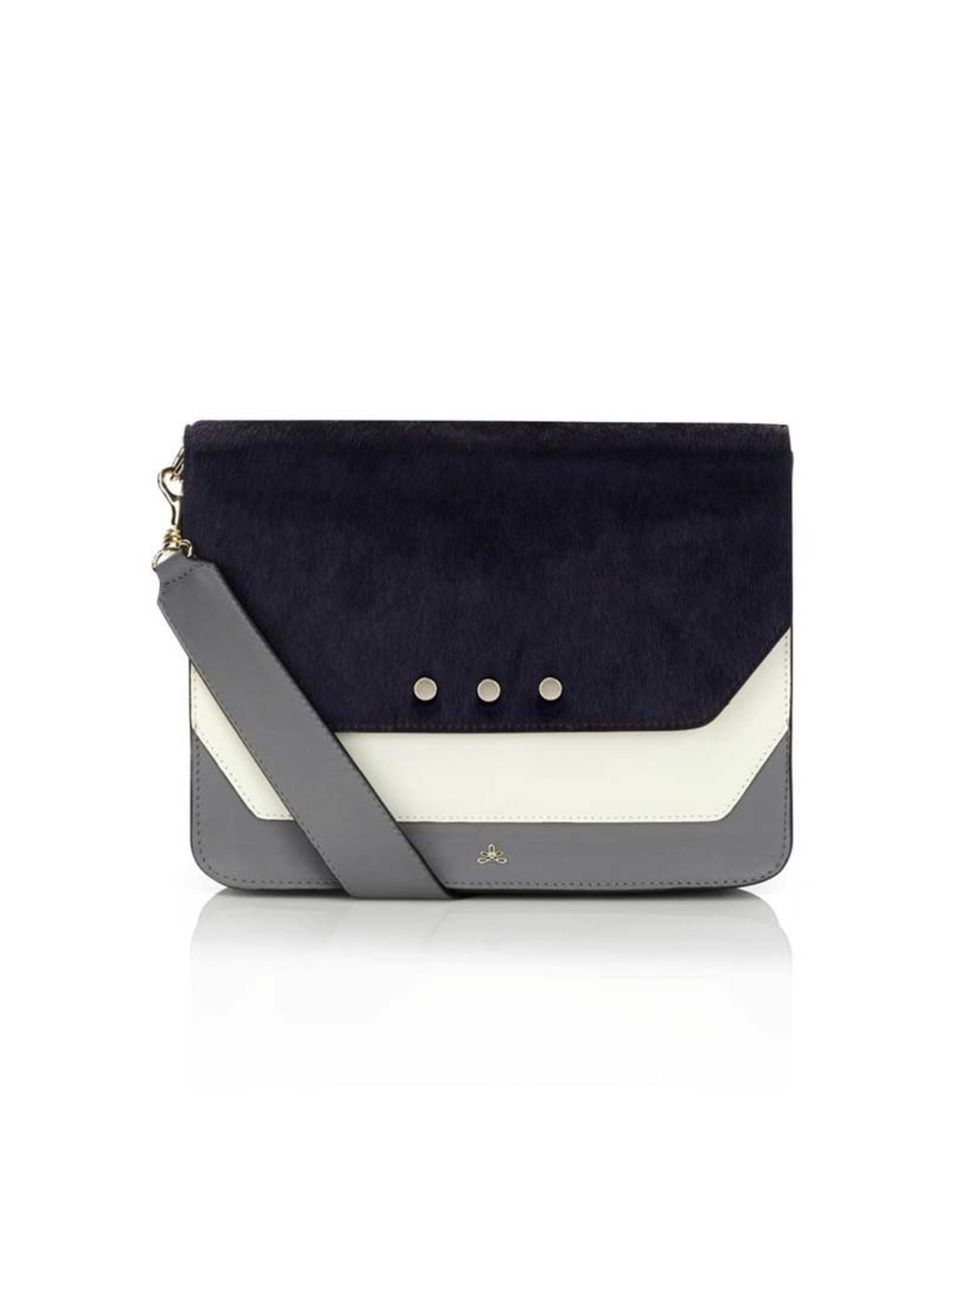 <p>This elegant little number doubles as both clutch and satchel, whether you're out for a glass of wine or running errands (not that we're saying that the two are mutually exclusive - wine-fuelled errand running is a great example of skilled multitasking